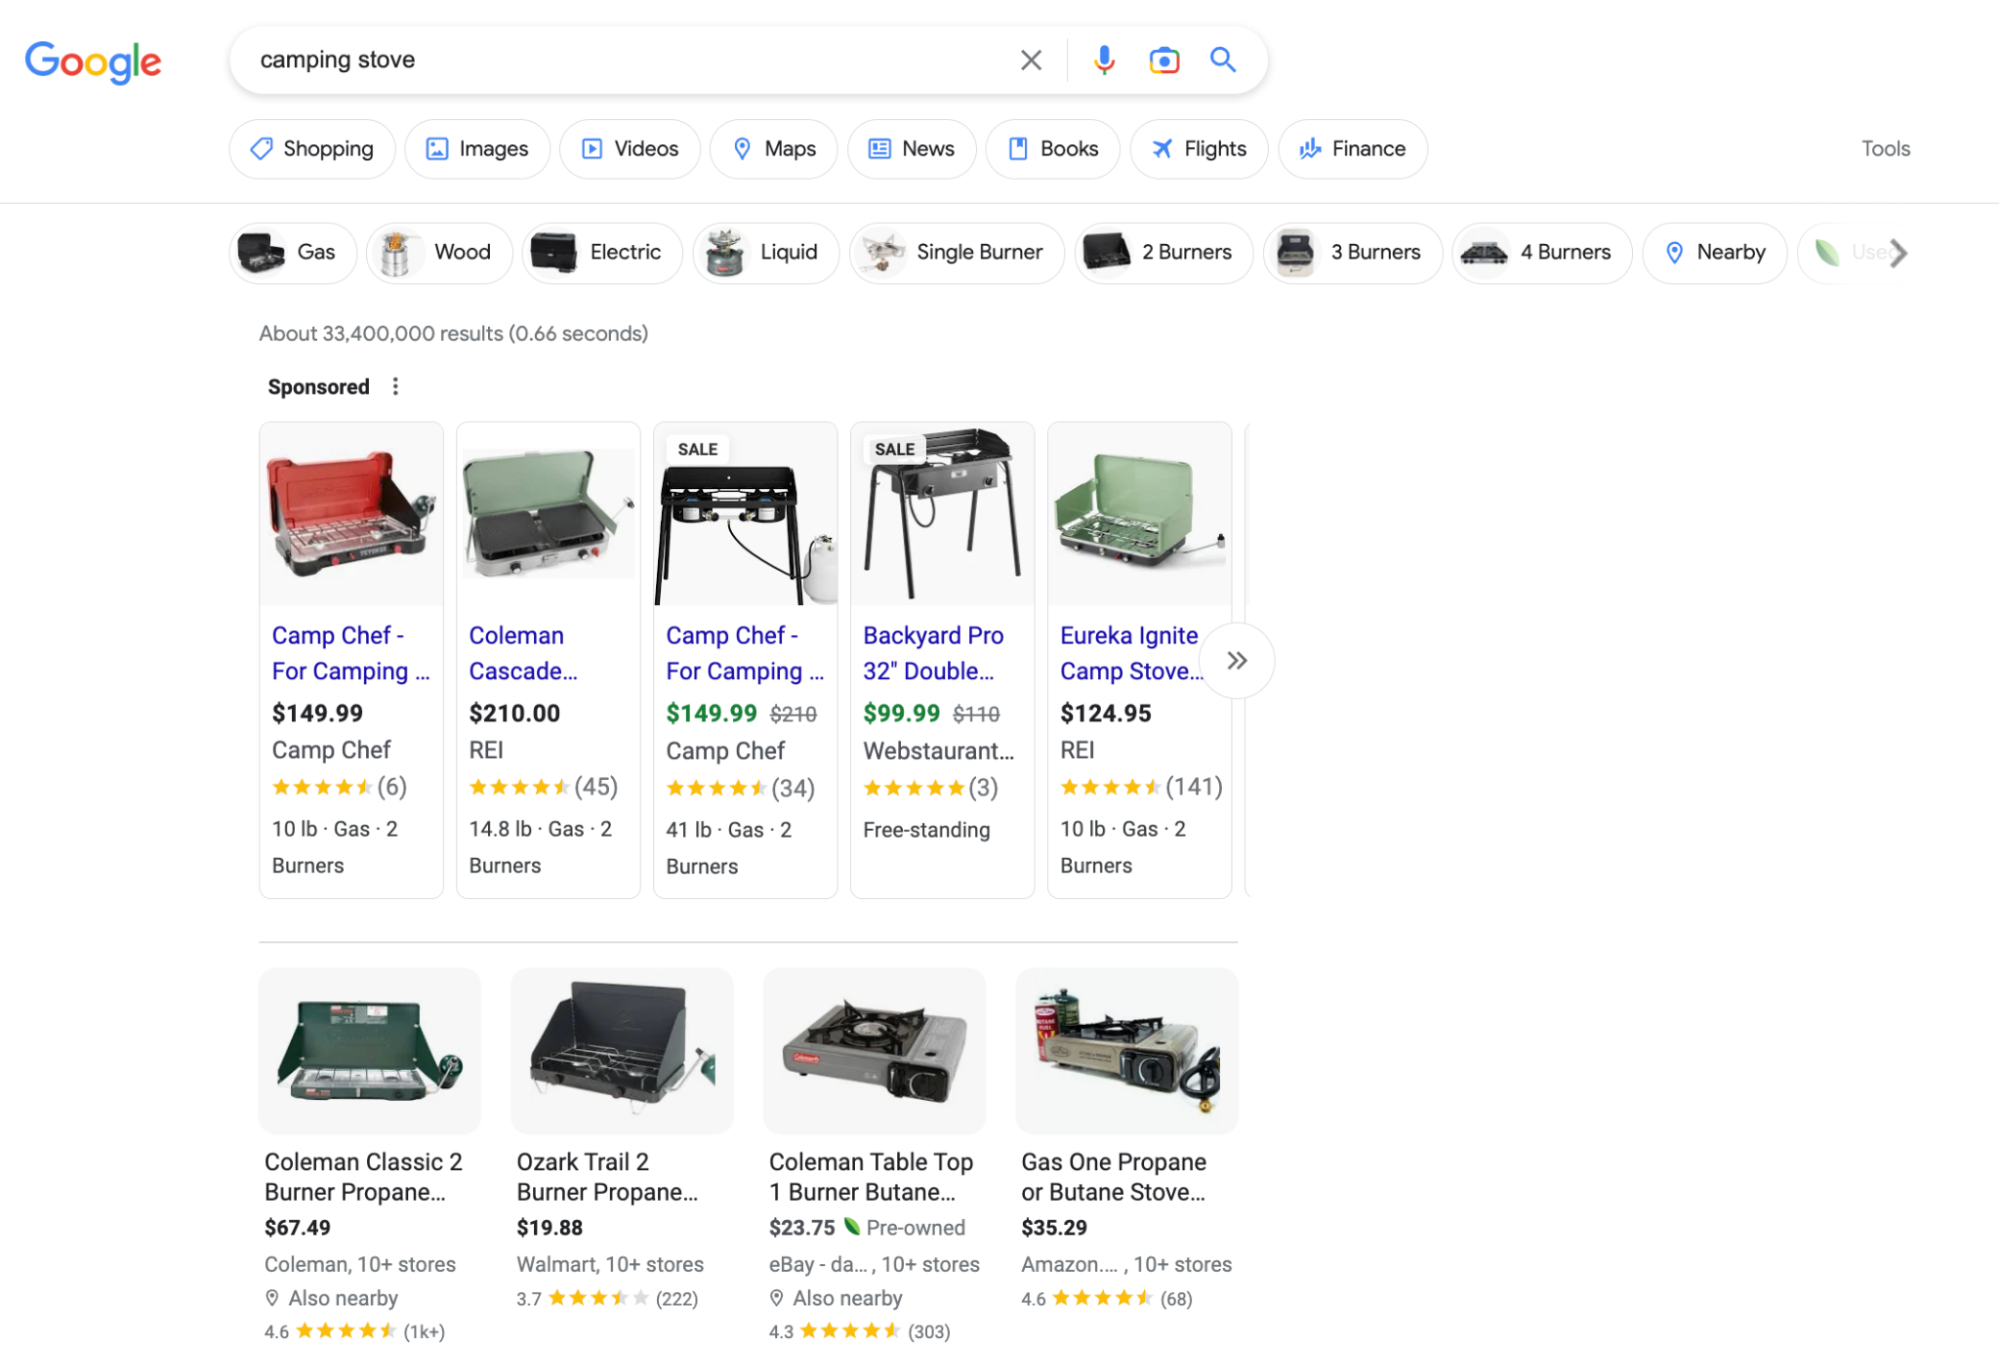 Google shopping SERP example for camping stovevs